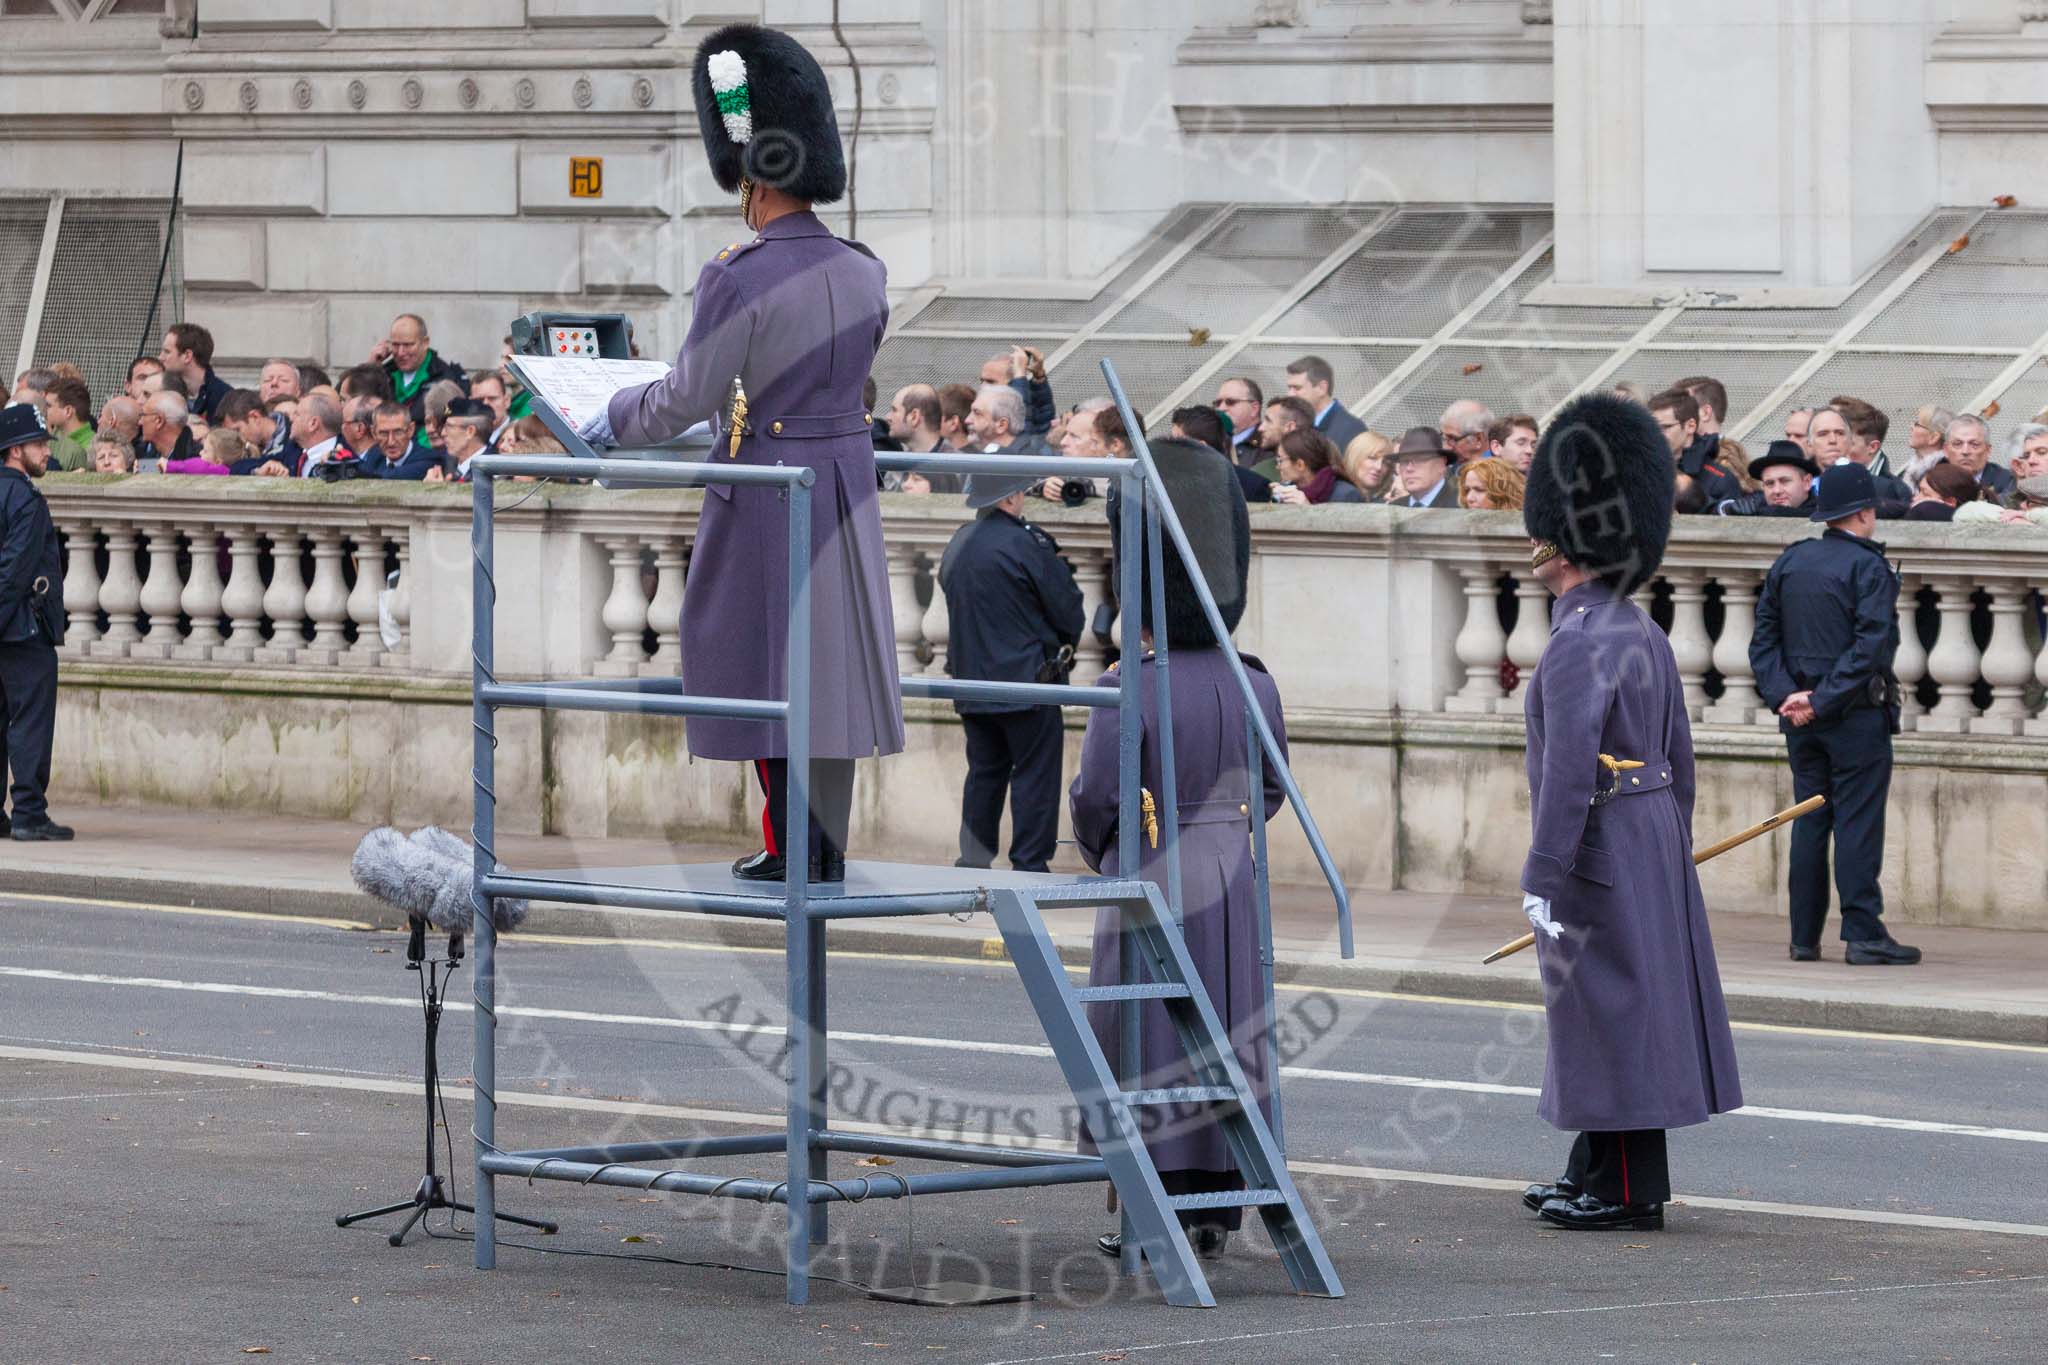 Remembrance Sunday at the Cenotaph 2015: The Senior Director of Music preparing for the event. Image #44, 08 November 2015 10:22 Whitehall, London, UK